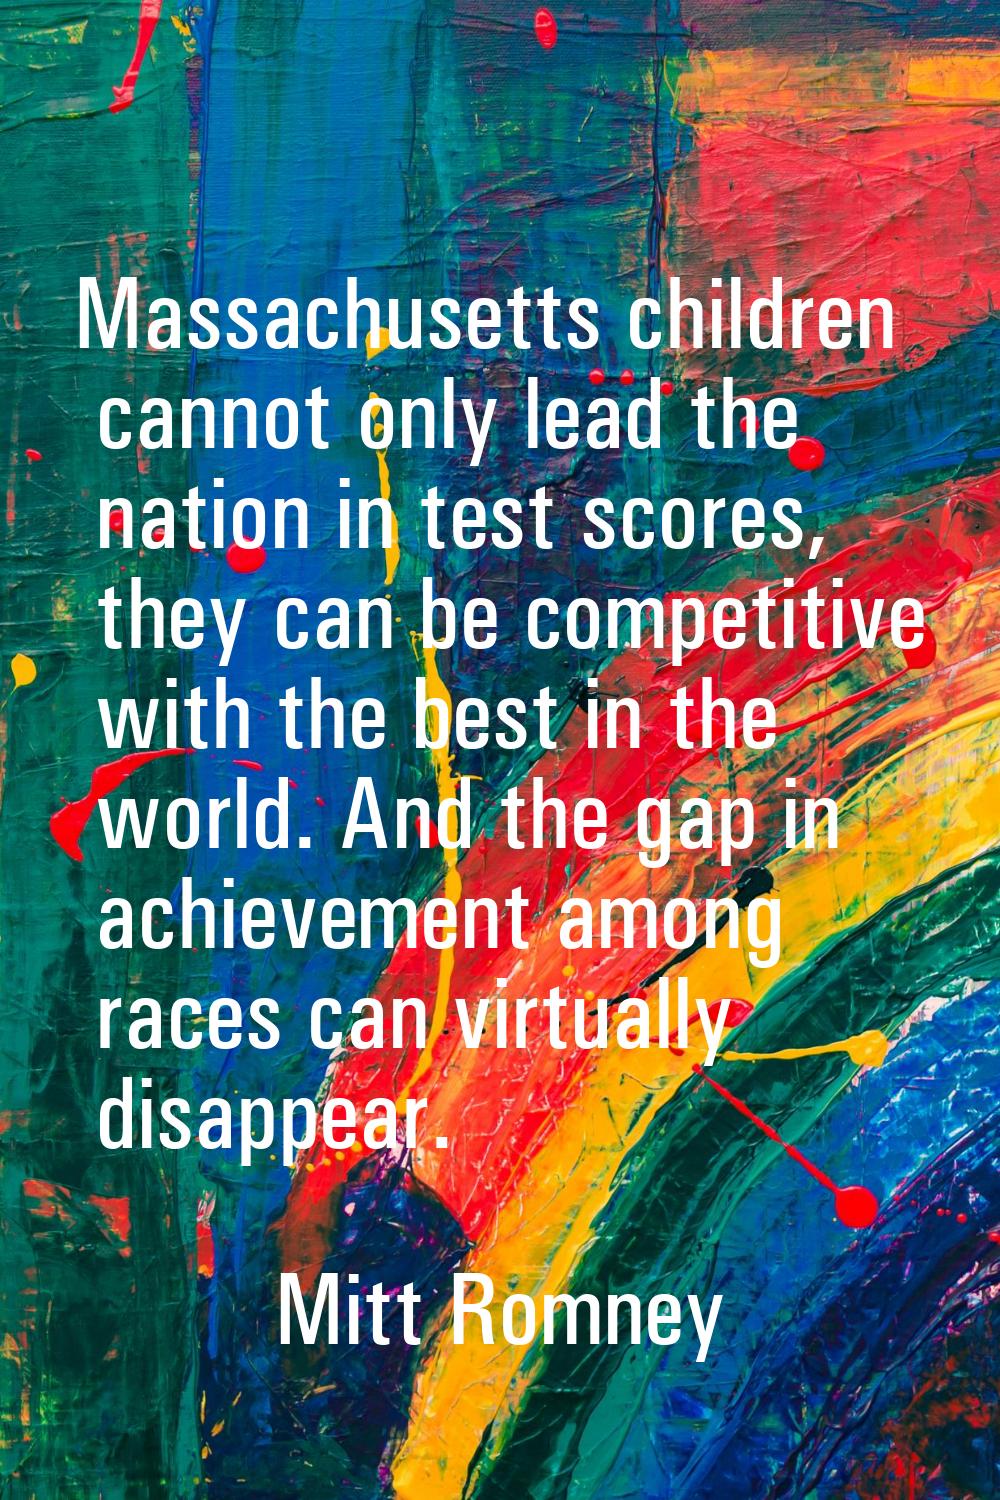 Massachusetts children cannot only lead the nation in test scores, they can be competitive with the